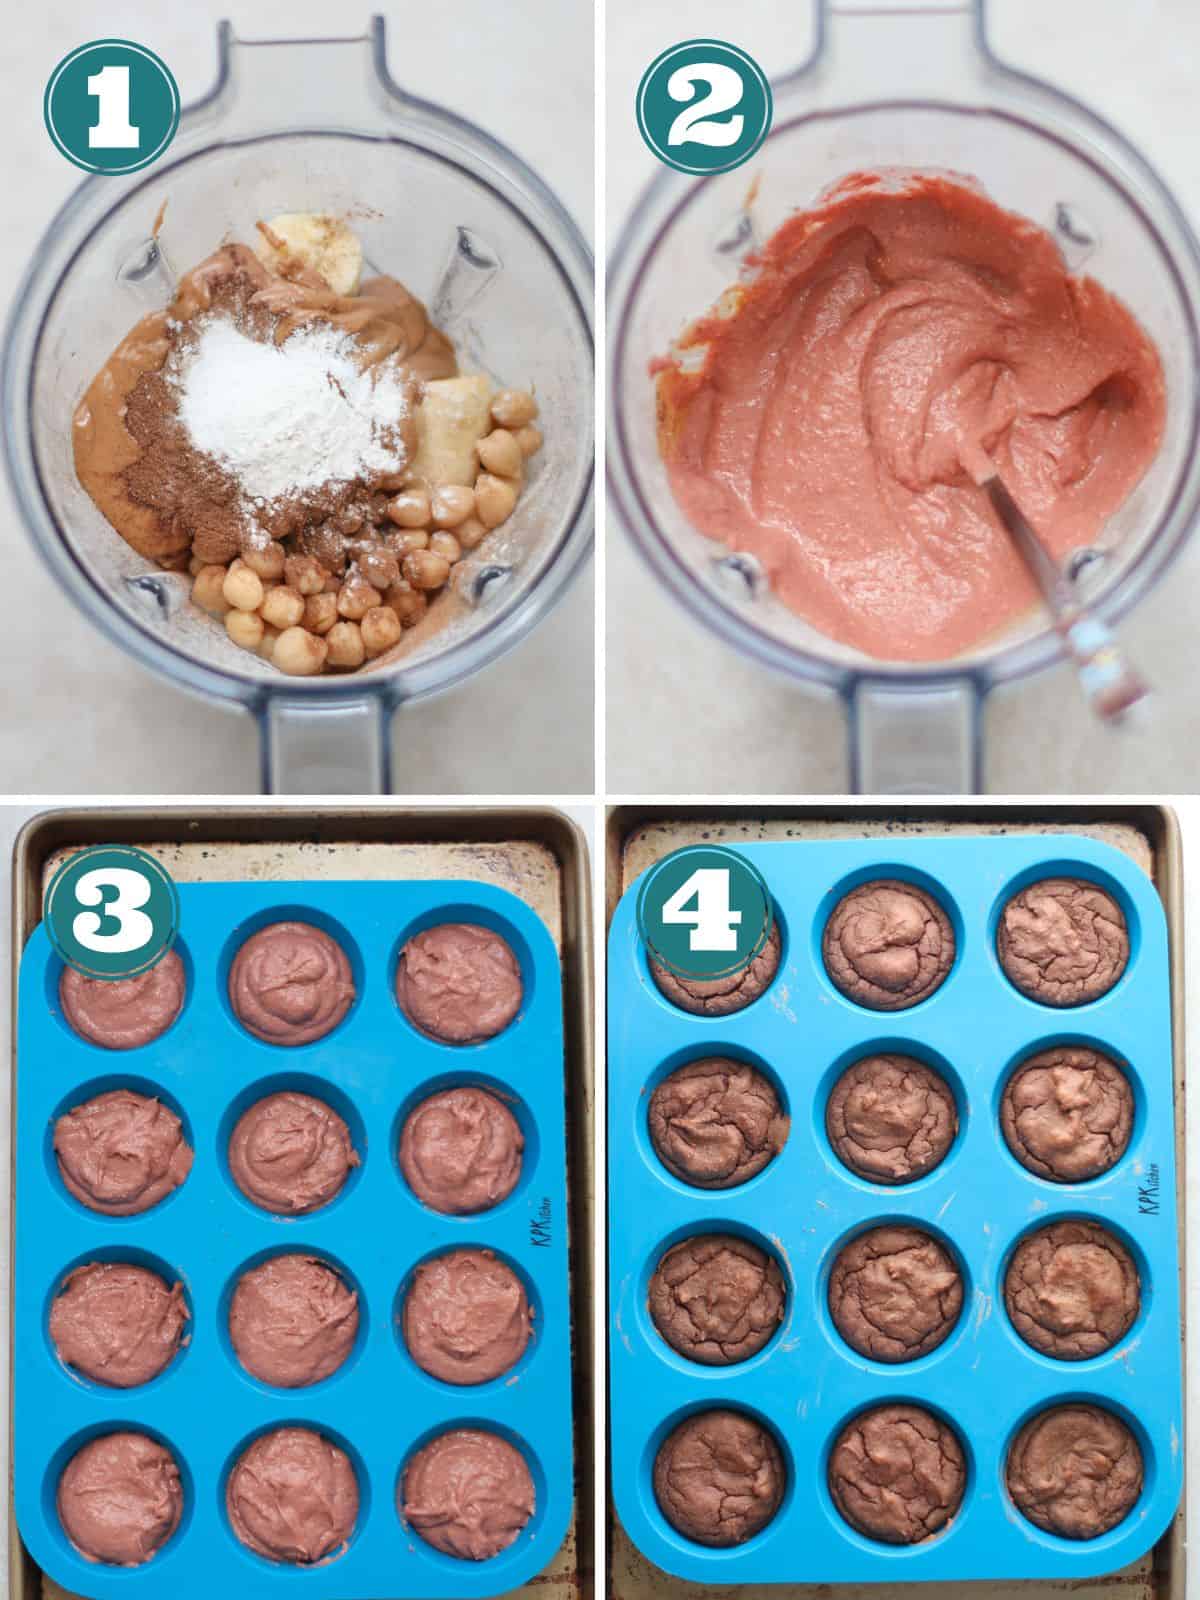 A four image collage showing how to make muffins step by step.